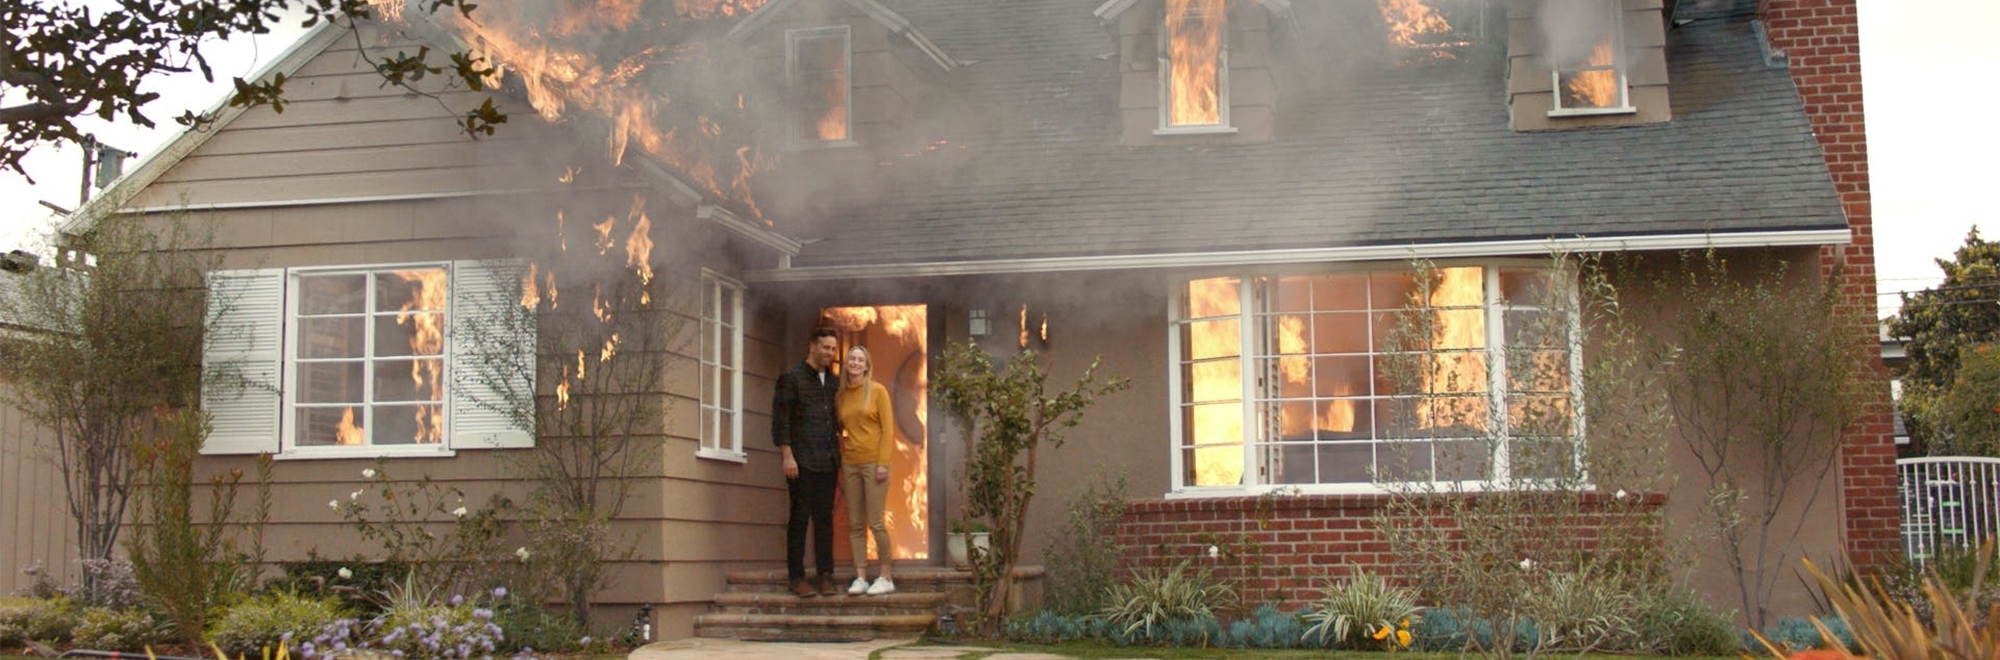 Greta's 'Our house is on fire' challenges our reactions by disrupting our learned expectations